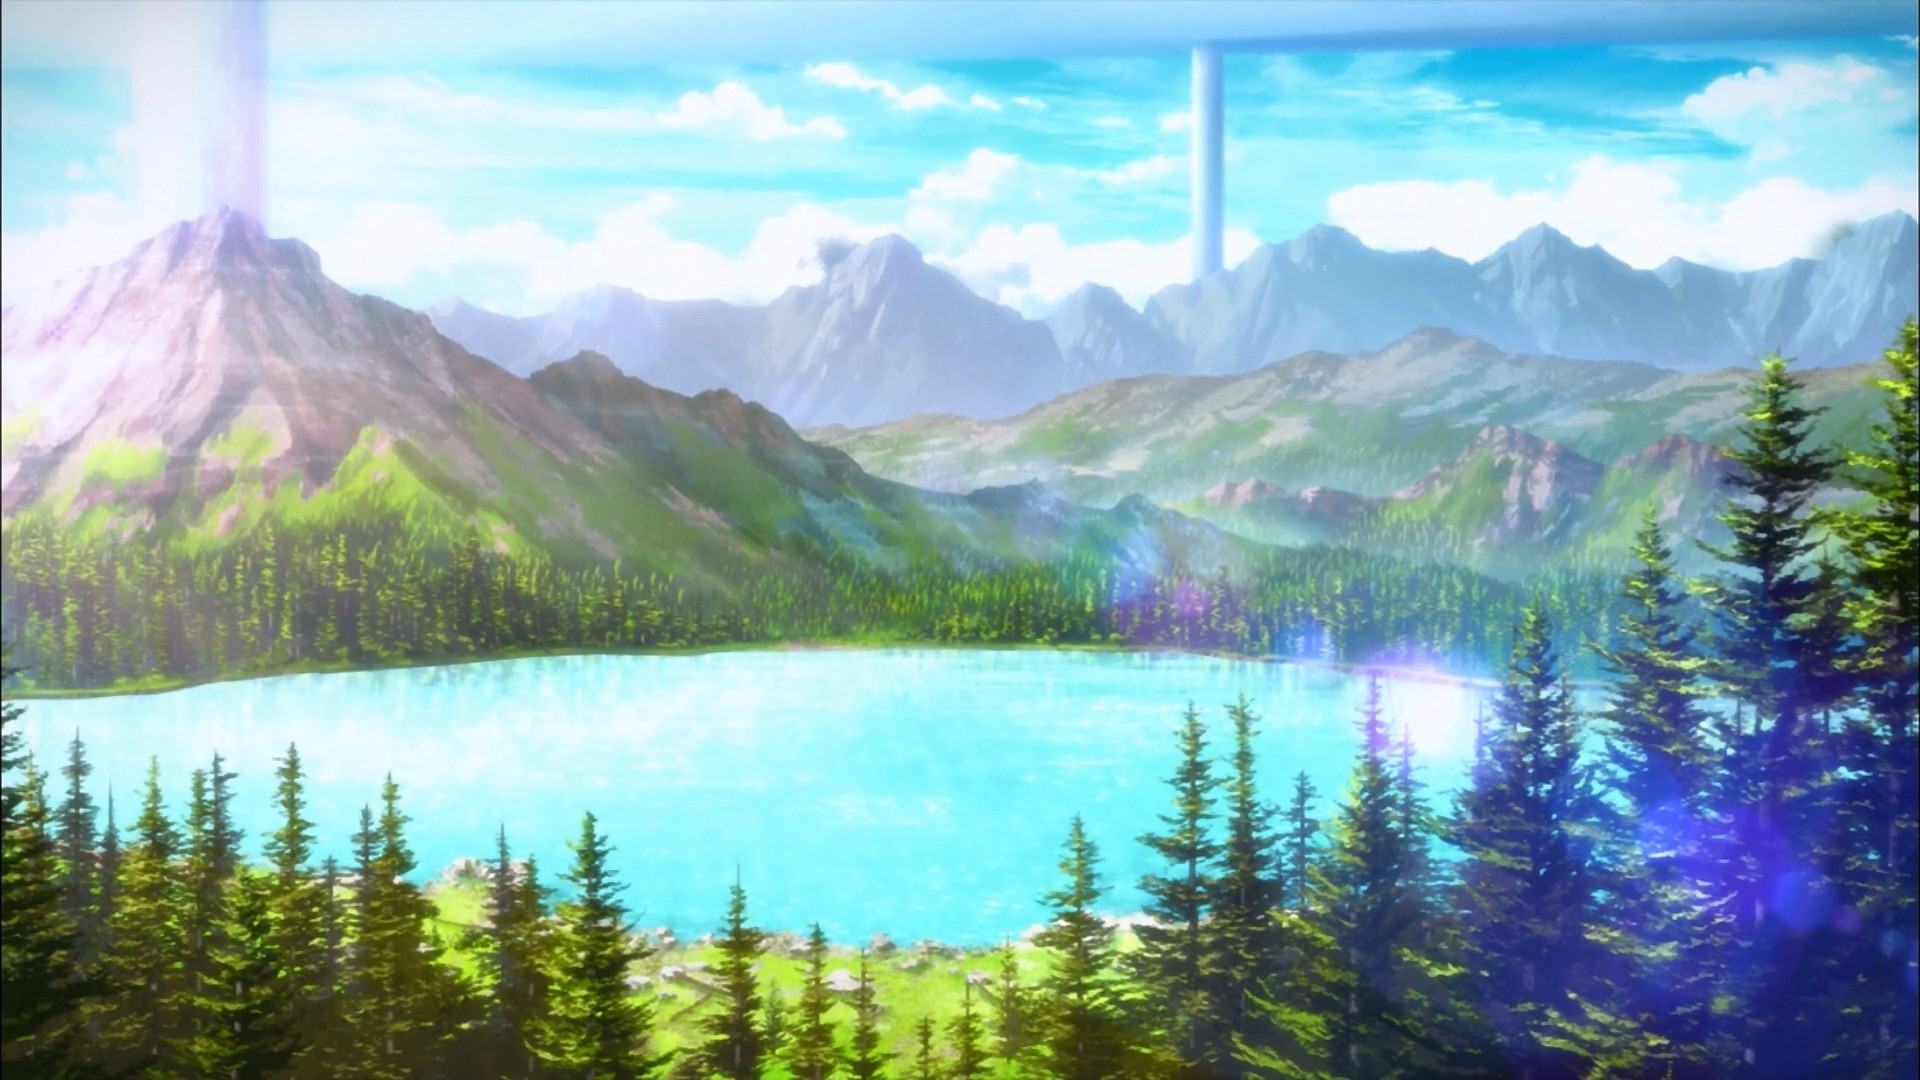 1920x1080 ... wallpapers backgrounds; anime landscape sword art online mountains  trees ...